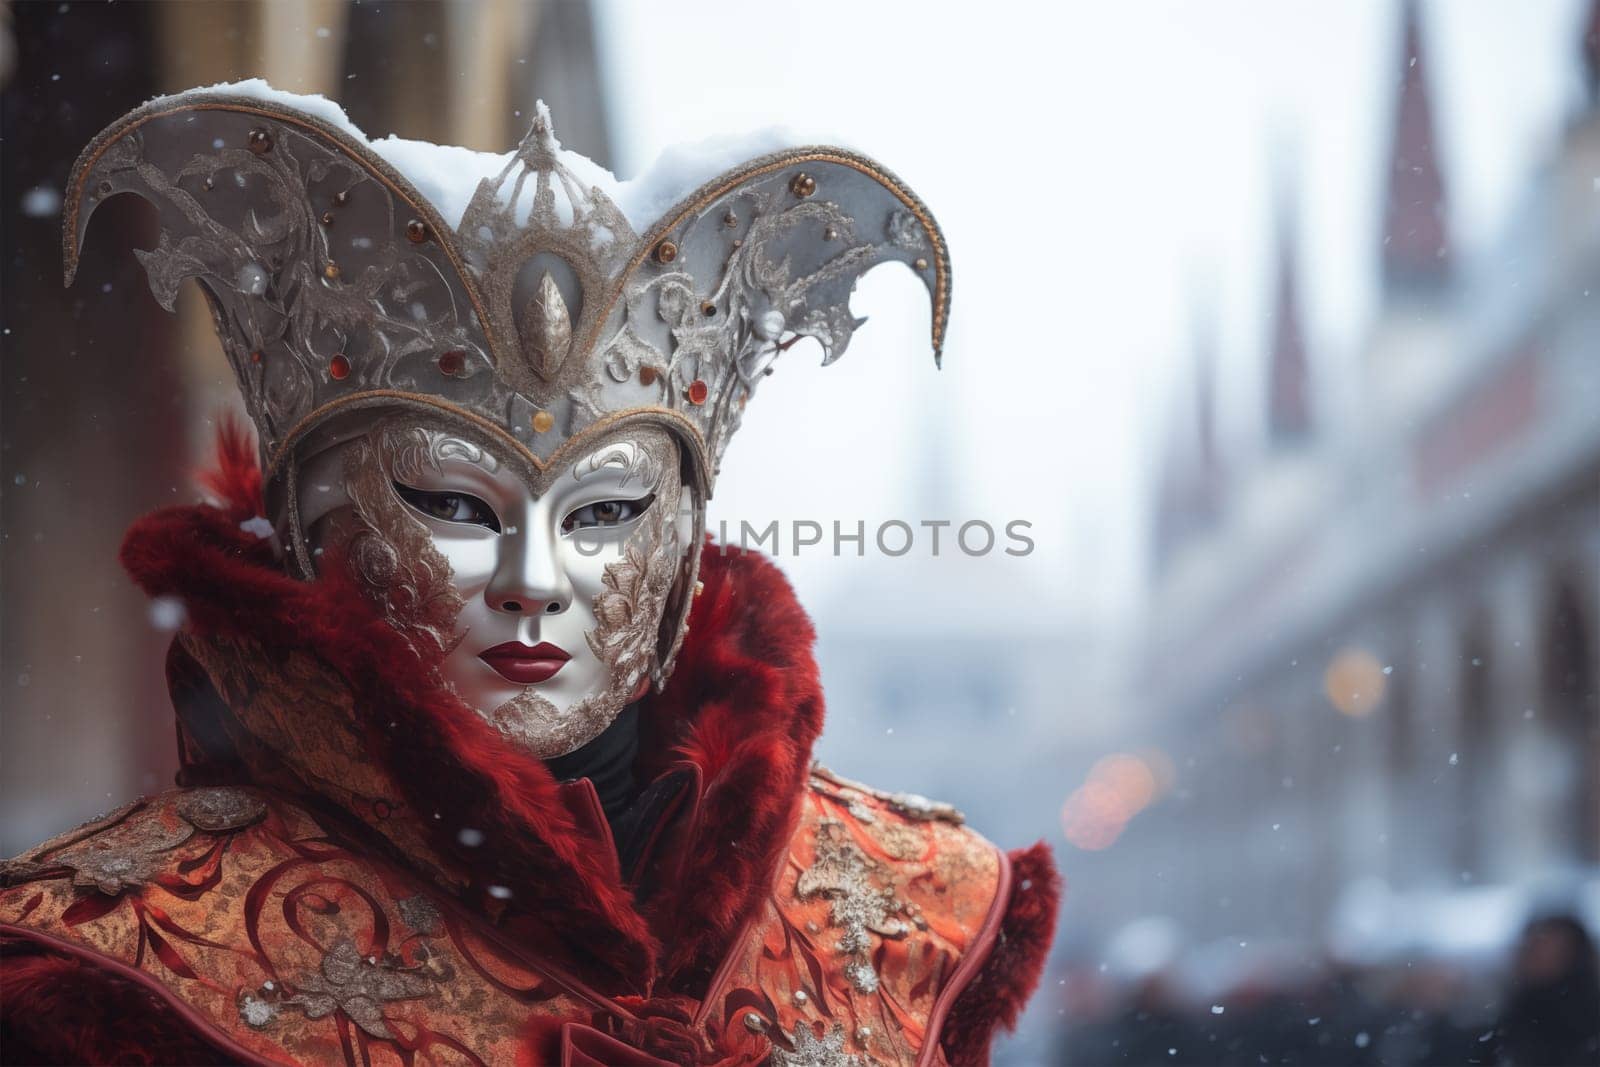 A person adorned in a richly detailed and colorful carnival costume, complete with an elaborate mask, participates in the iconic Venice Carnival with snowfall